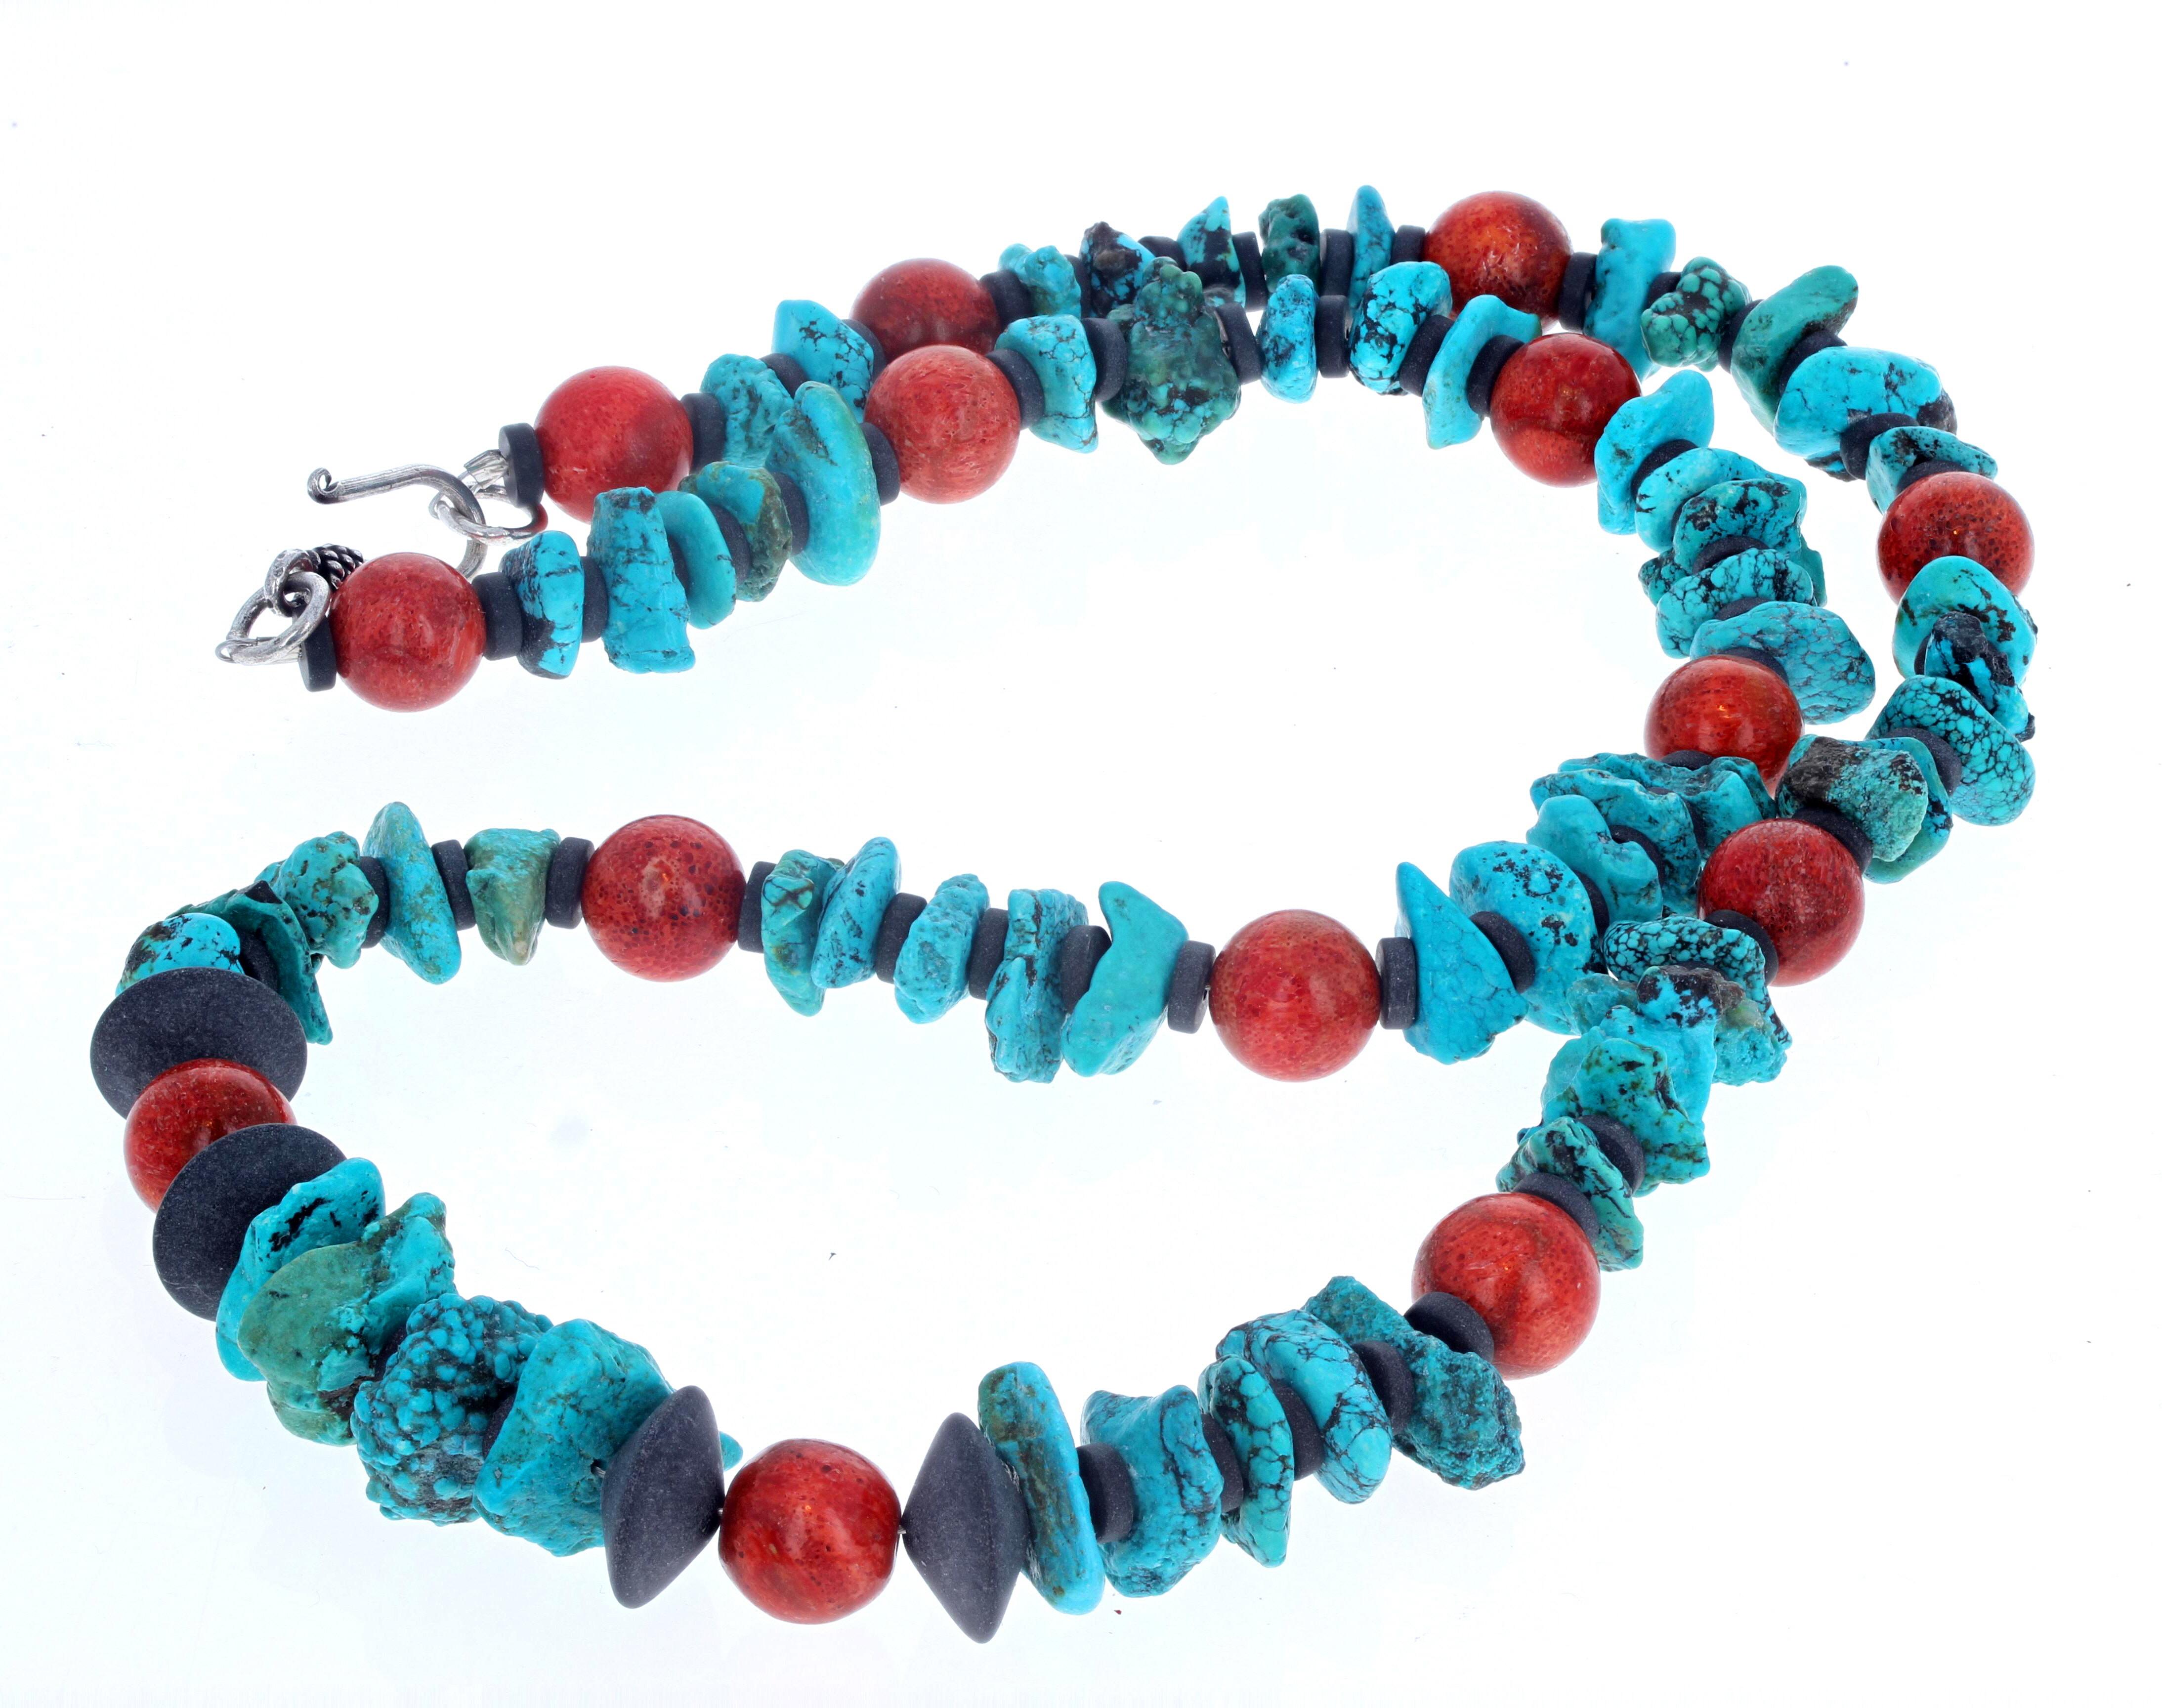 This elegant simple natural beautiful blue Turquoise and orangy Coral necklace is 25 inches long.  The larger polished chunks of Turquoise are approximately 13 1.2mm and the round orangy Coral are approximately 11 1/2mm all spaced with black Onyx. 